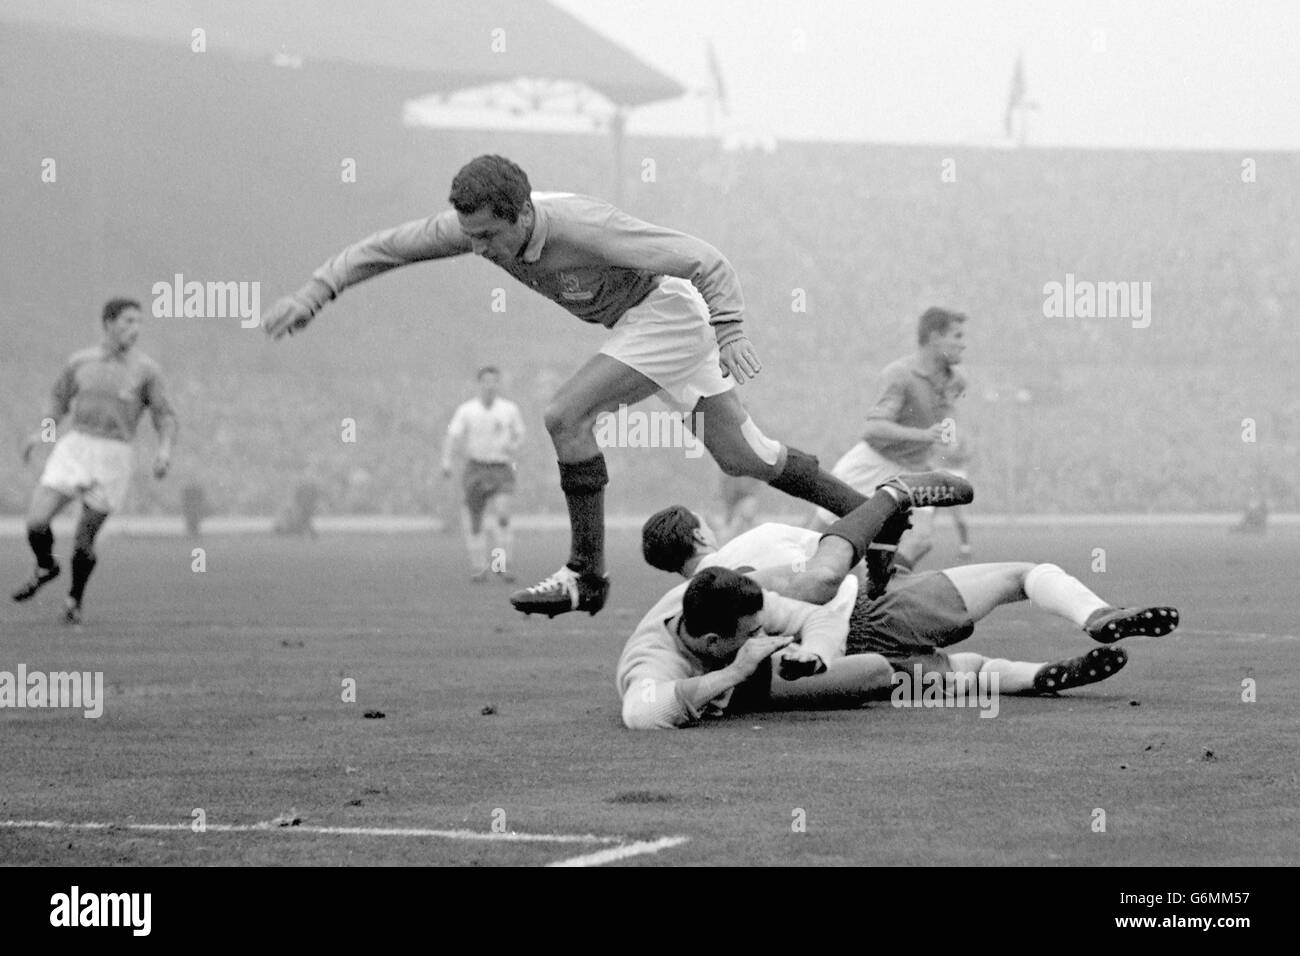 France goalkeeper Claude Abbes goes sprawling with England's Bobby Robson while France's Mustapha Zitouni jumps over the top during an England attack on the French goal in the international at Wembley. Mustapha Zitouni would go on to quit France in 1958 prior to the World Cup Finals to play for his native Algeria. Stock Photo